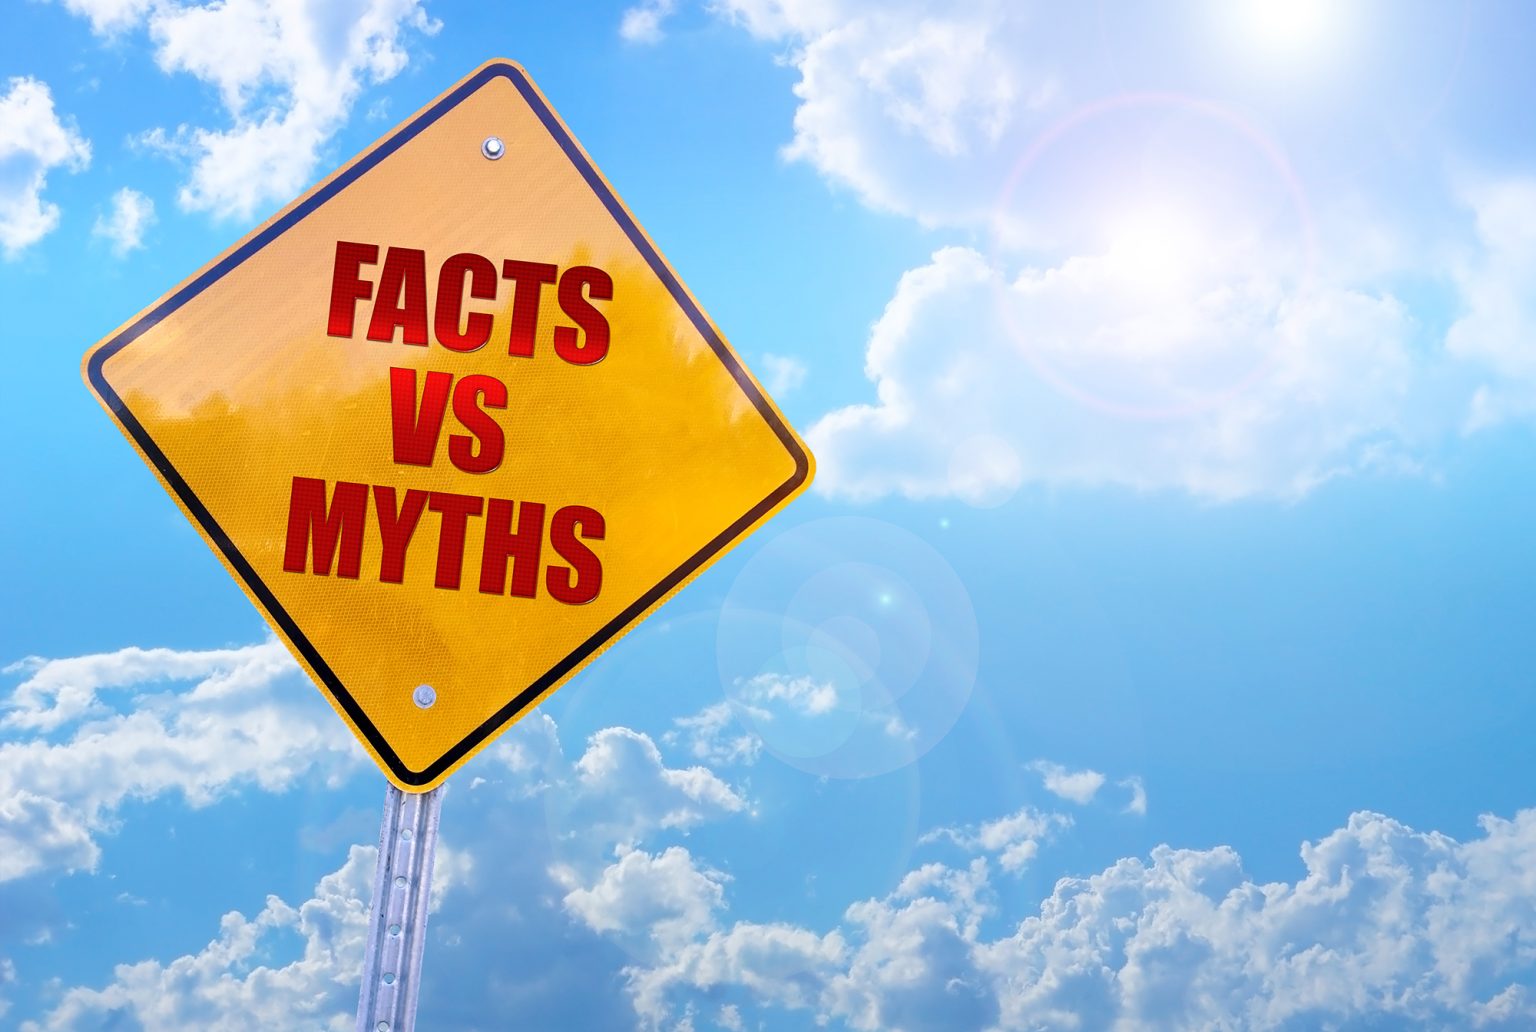 facts vs myths word on yellow traffic sign blue sky background